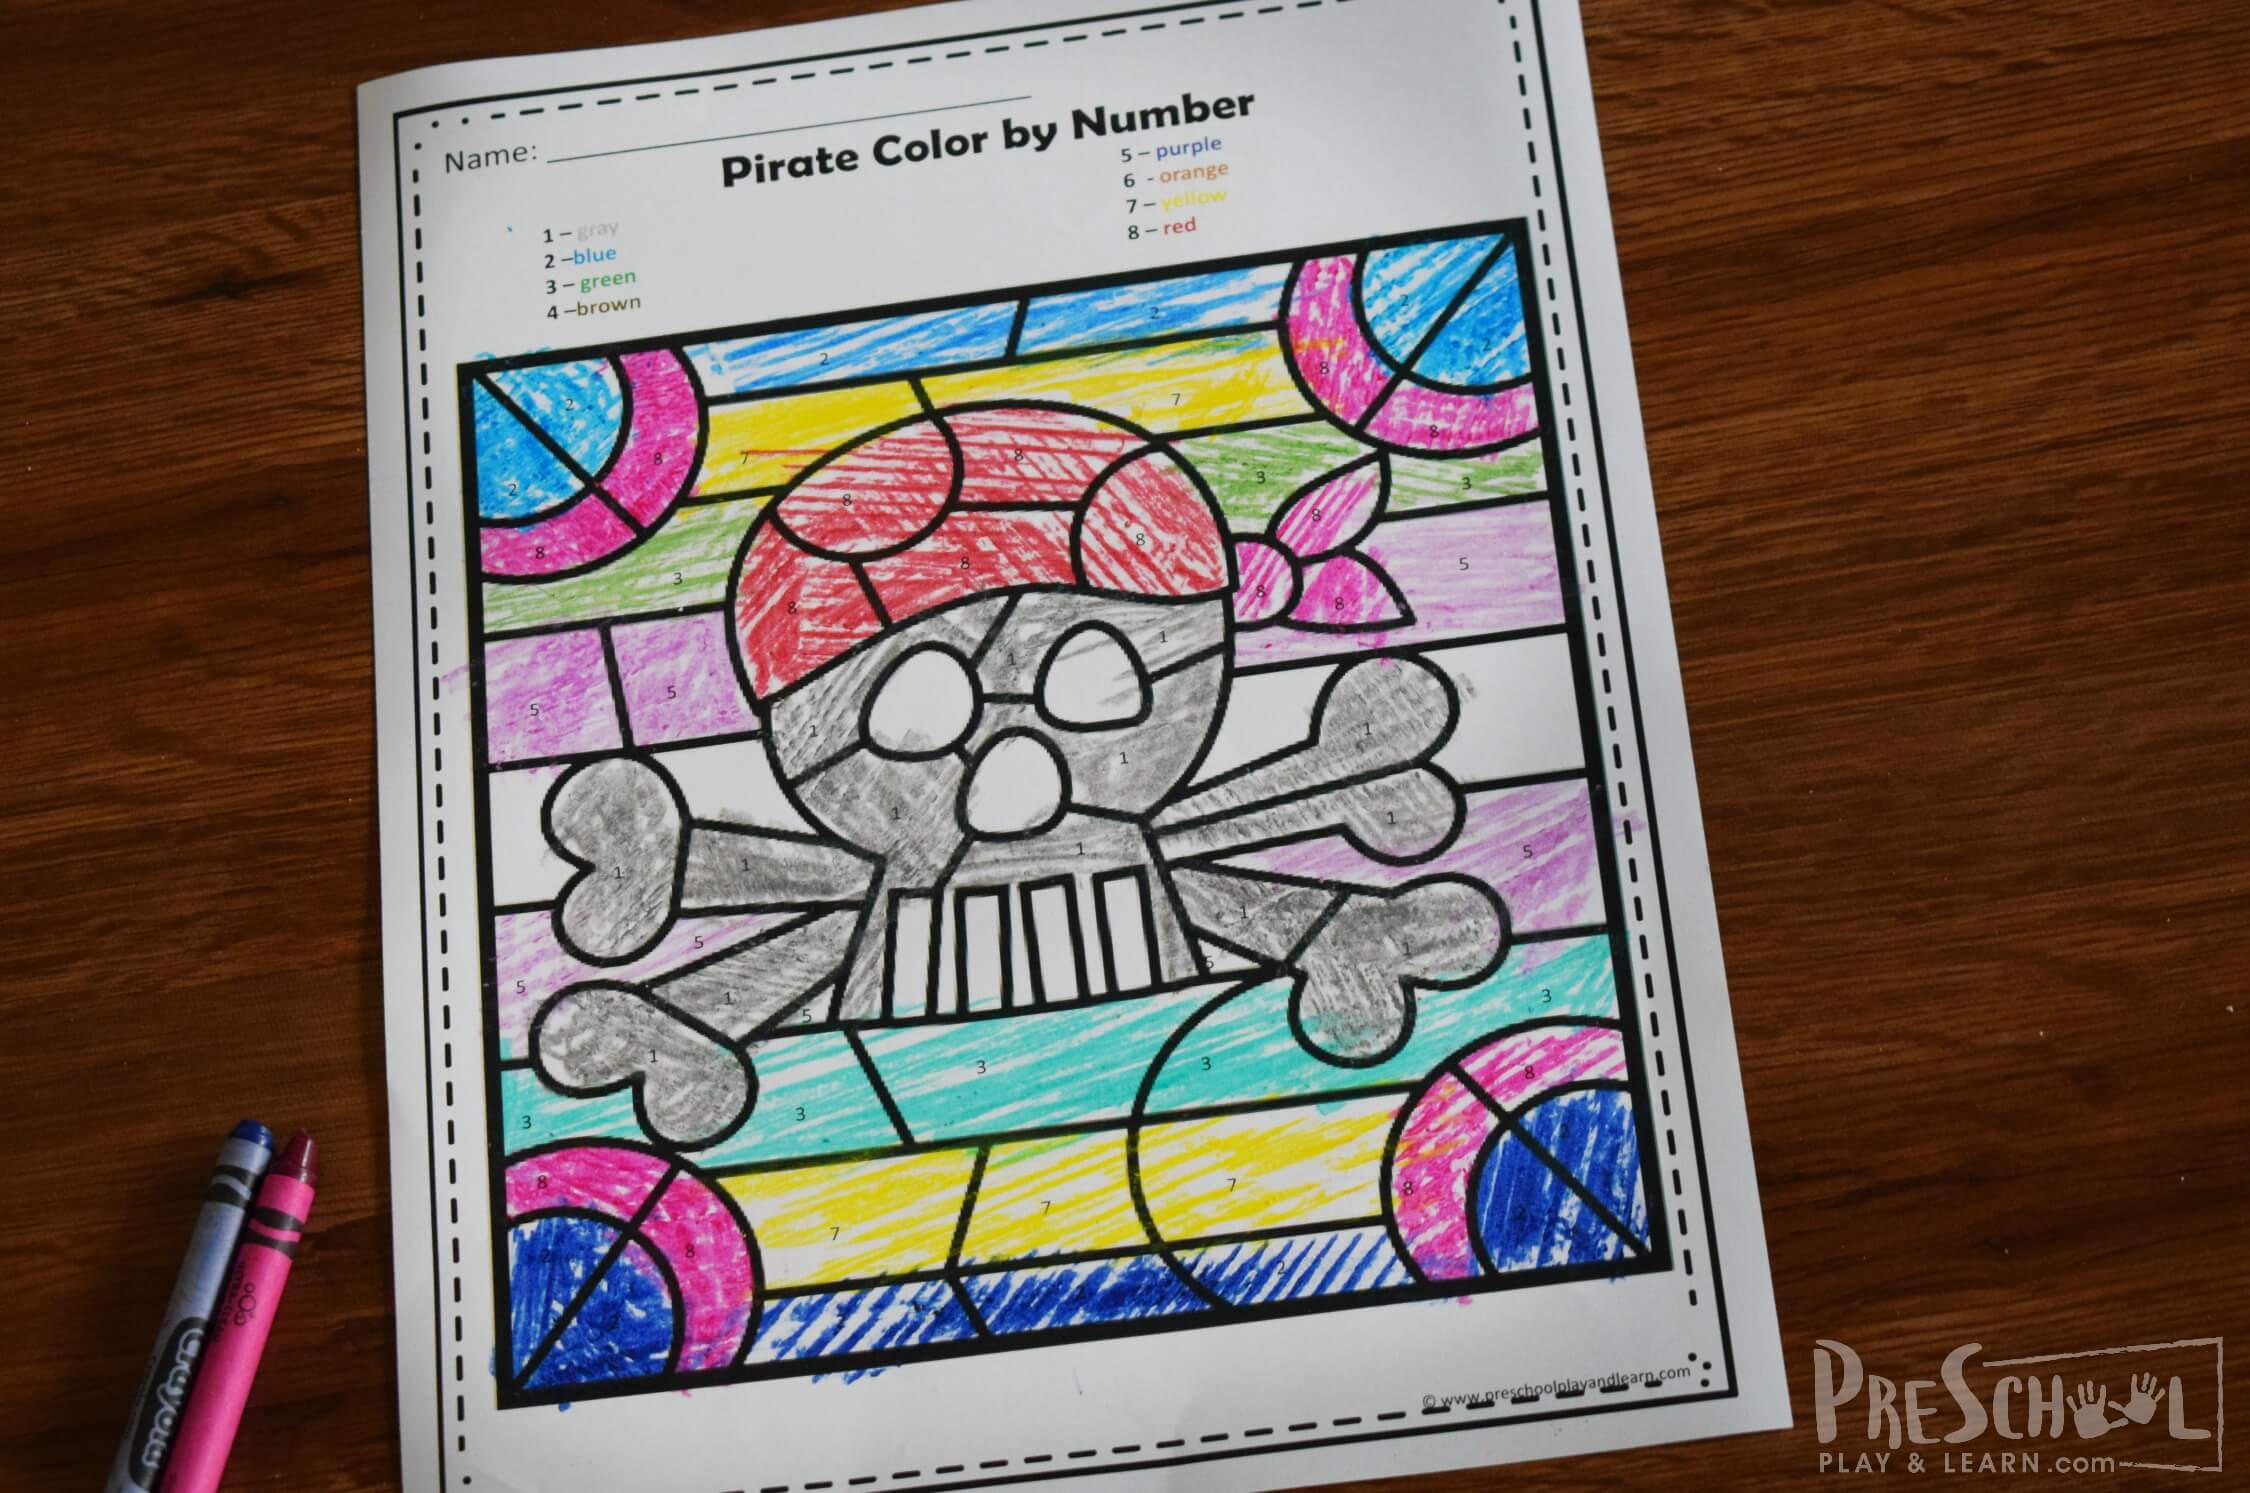 free-pirate-color-by-number-printable-worksheets-for-kids